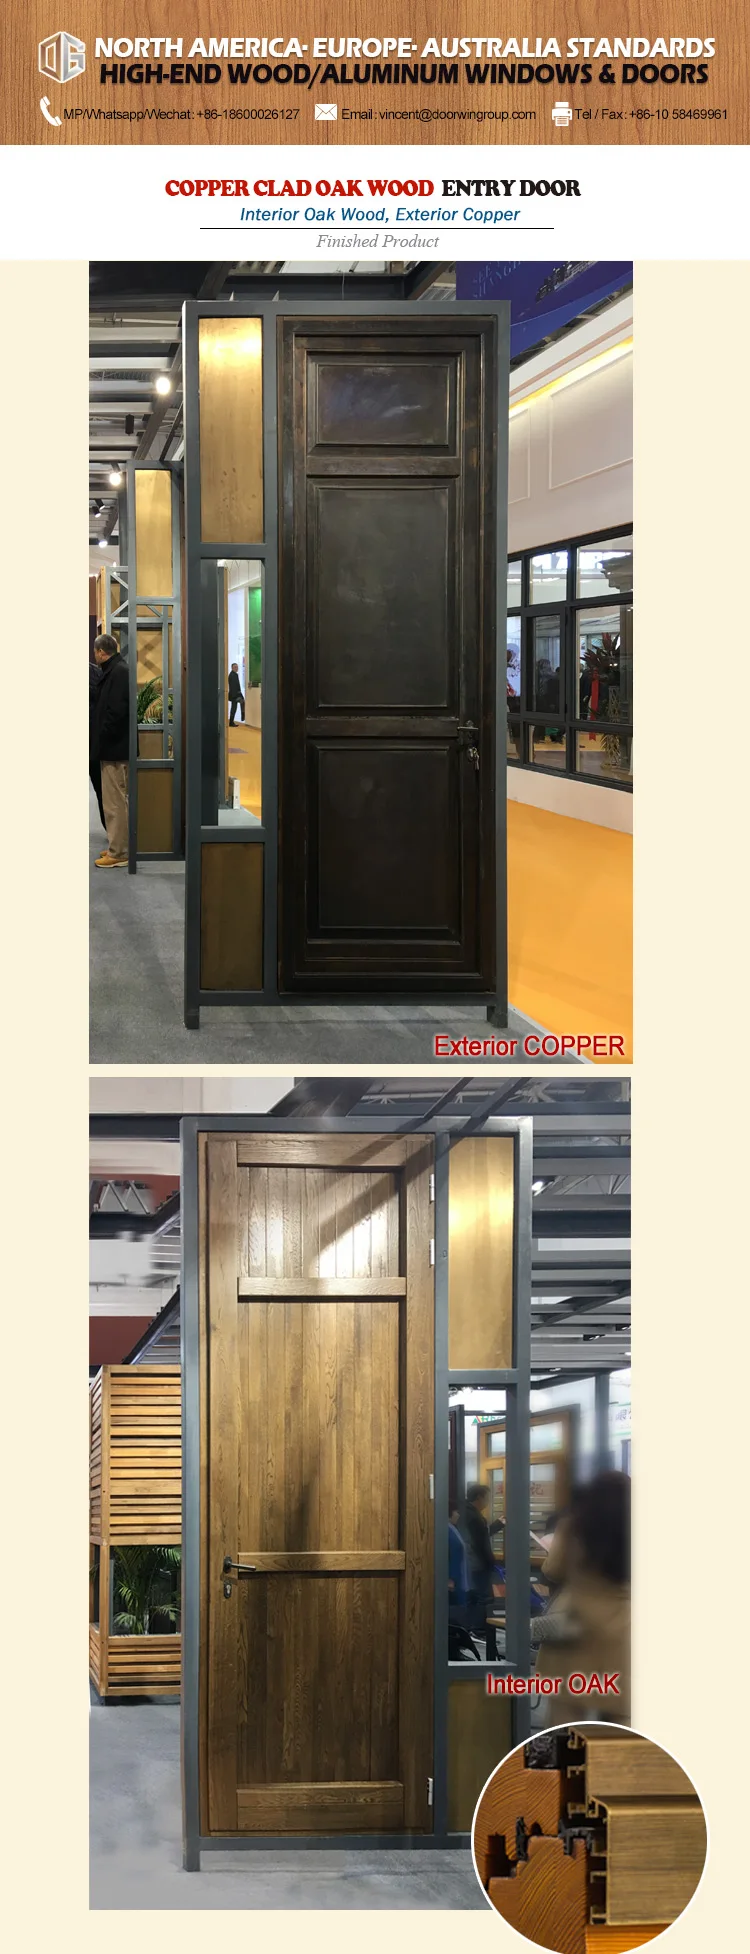 China Supplier fire rated entry doors farmhouse front door with sidelights external oak